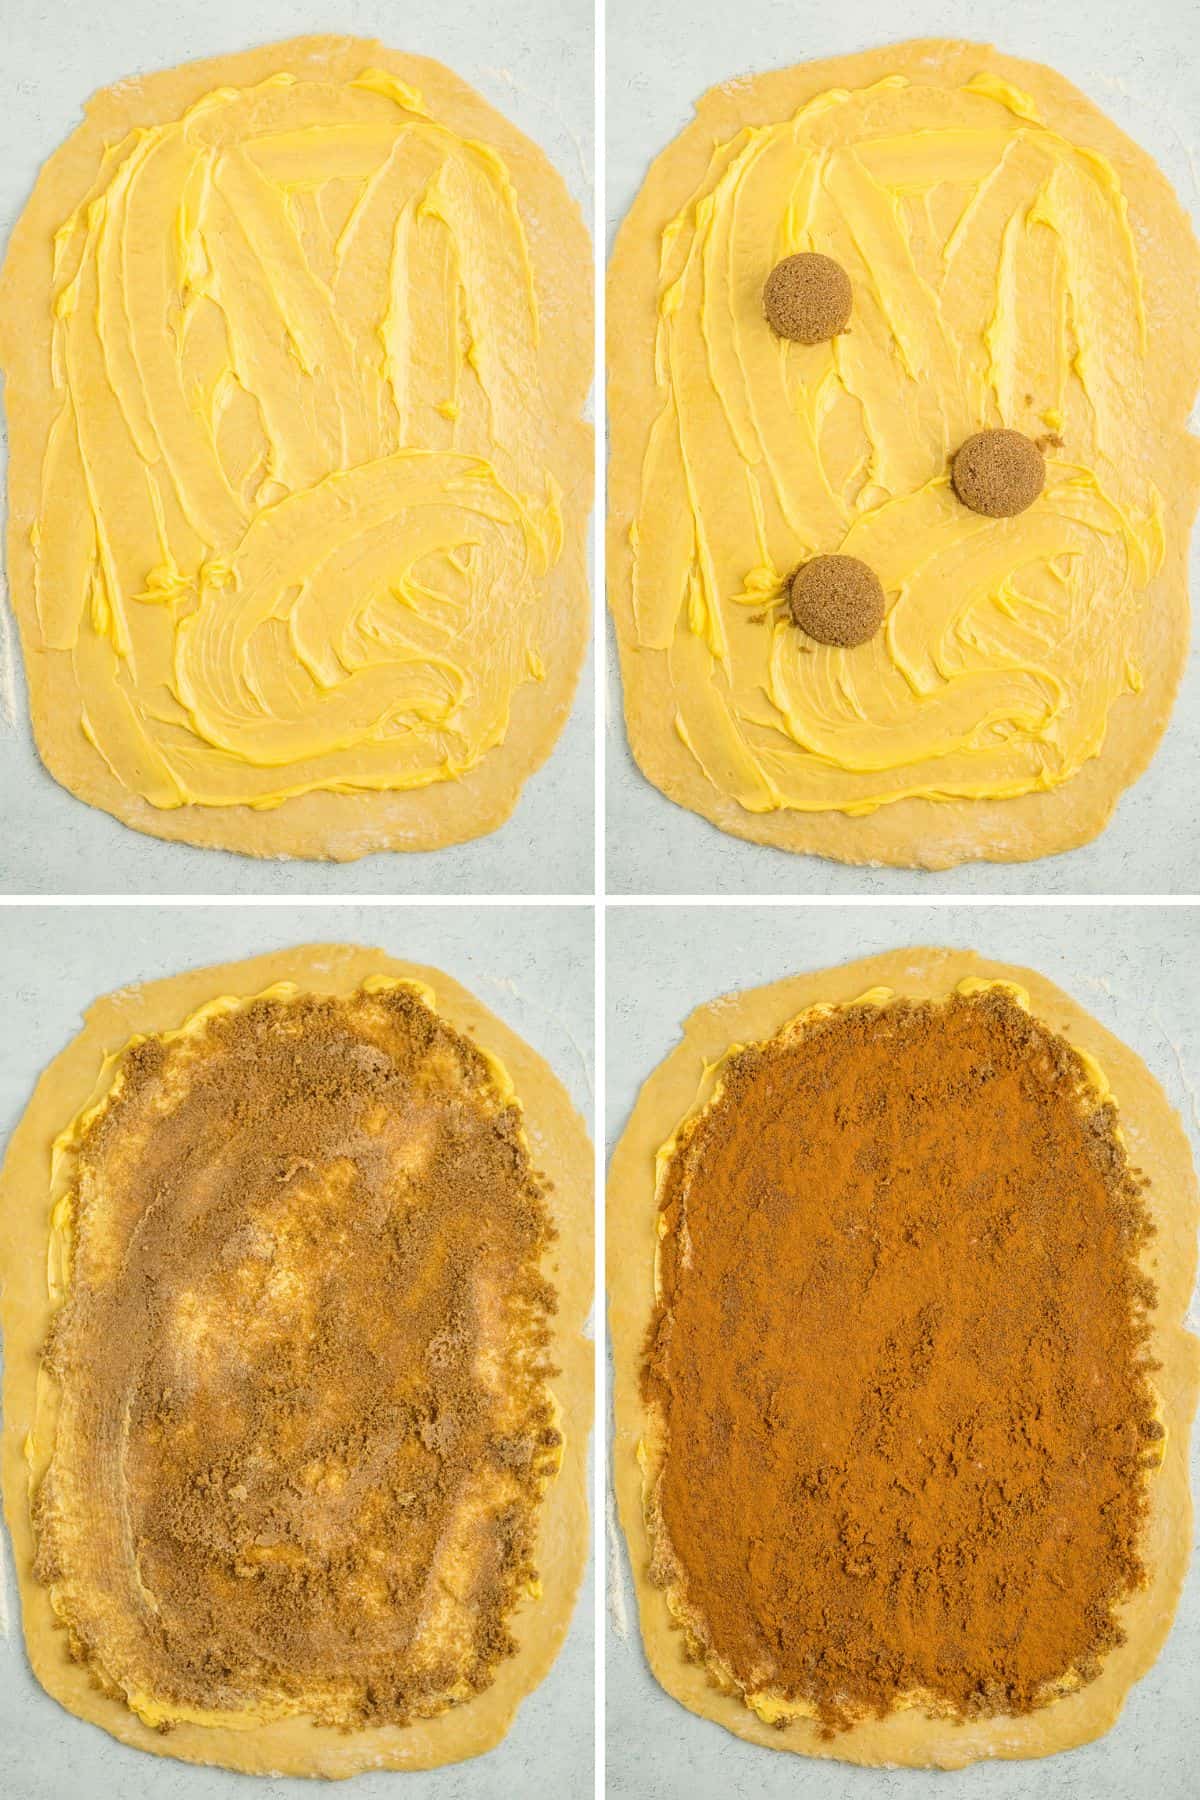 4 photos showing the process of rolling out brioche dough.